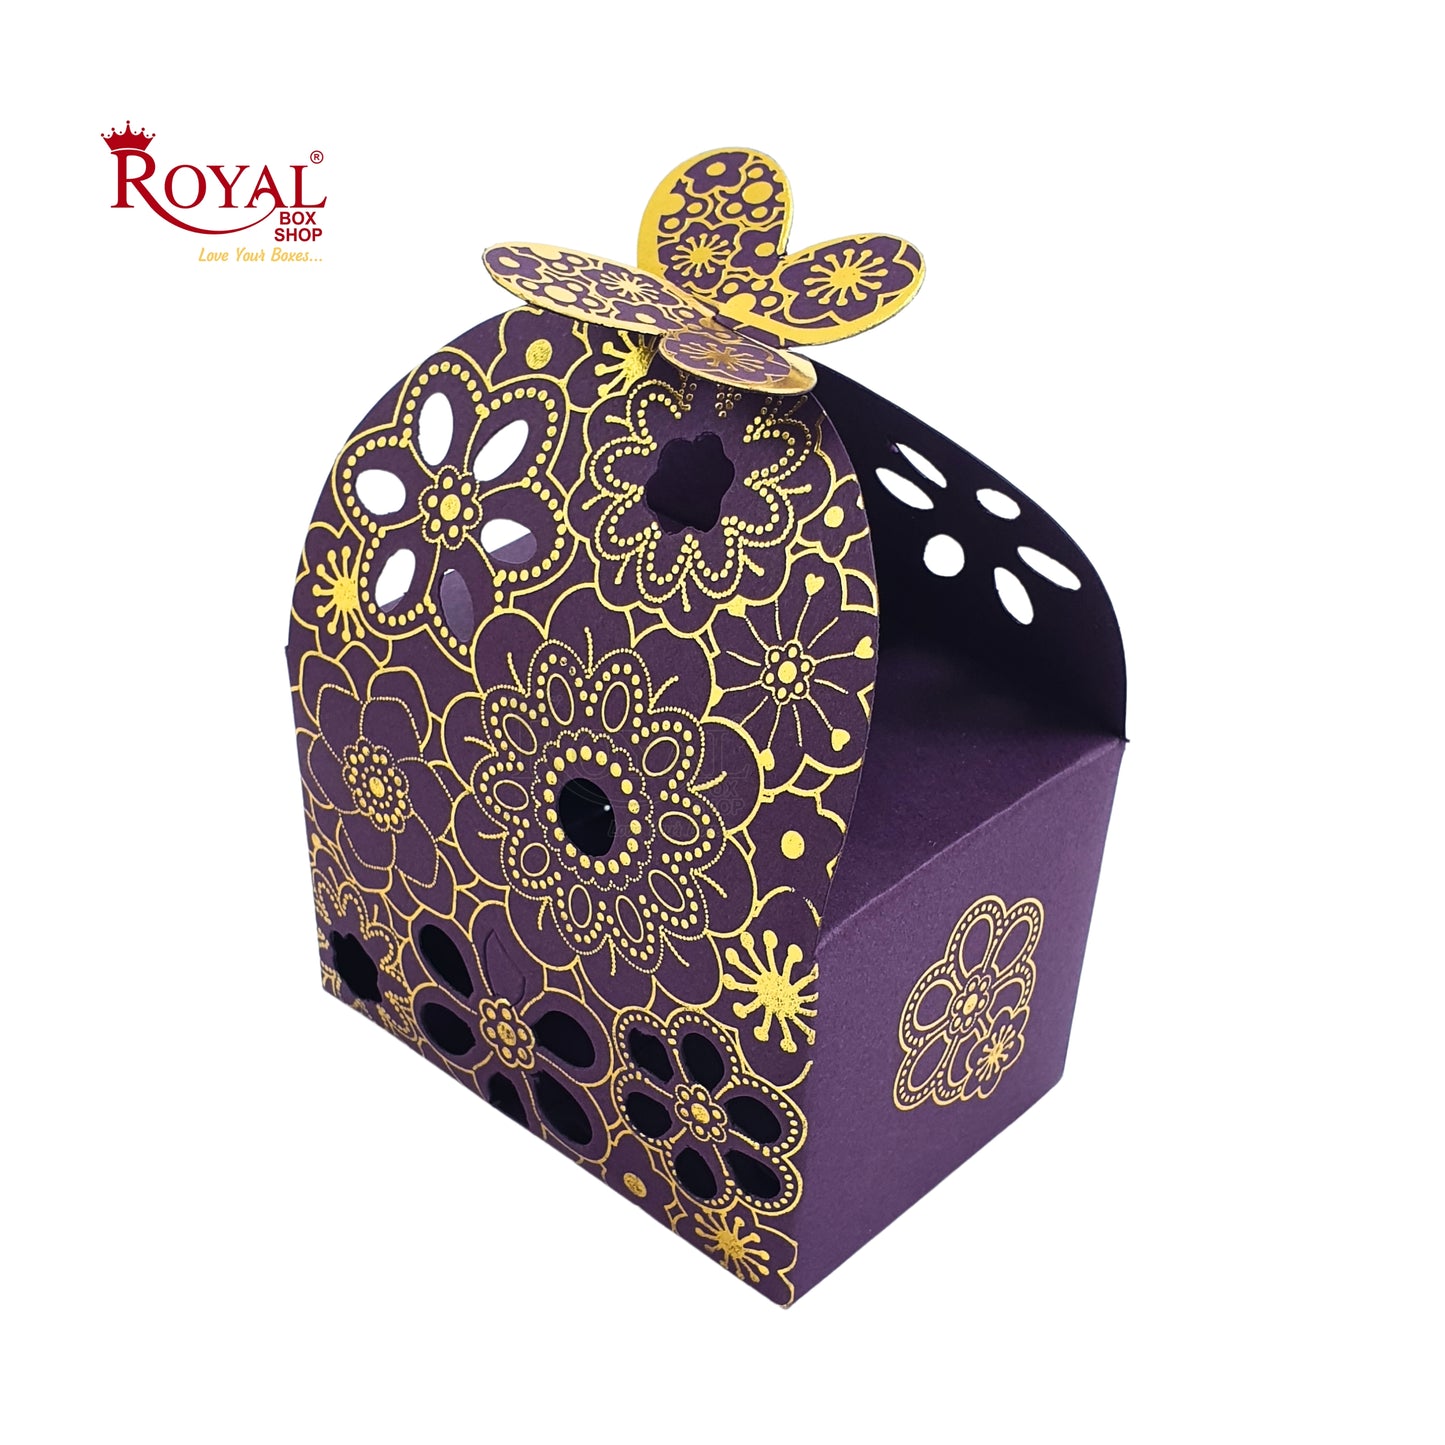 Flower Butterfly Hollow Candy Box by Royal Box Shop – Perfect for Return Gifts and Party Favors